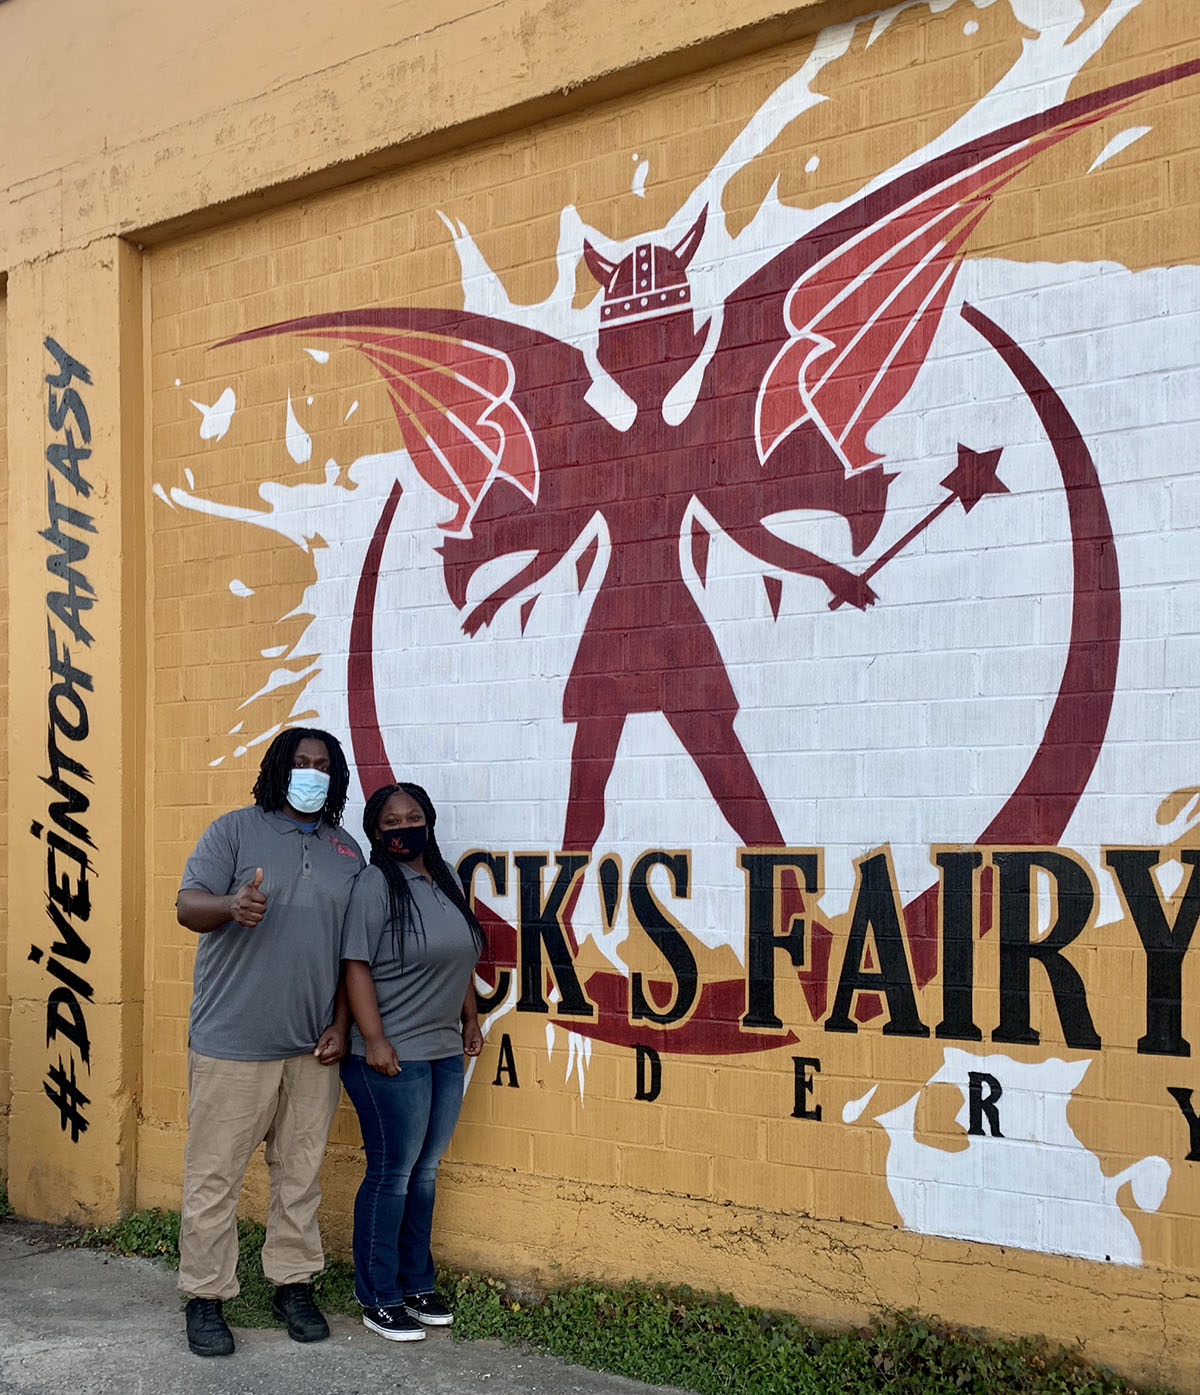 Black's Fairy Meadery co-owners Calvin Greene and Terica Groves photographed at their meadery, standing next to a mural on the outside of the building.